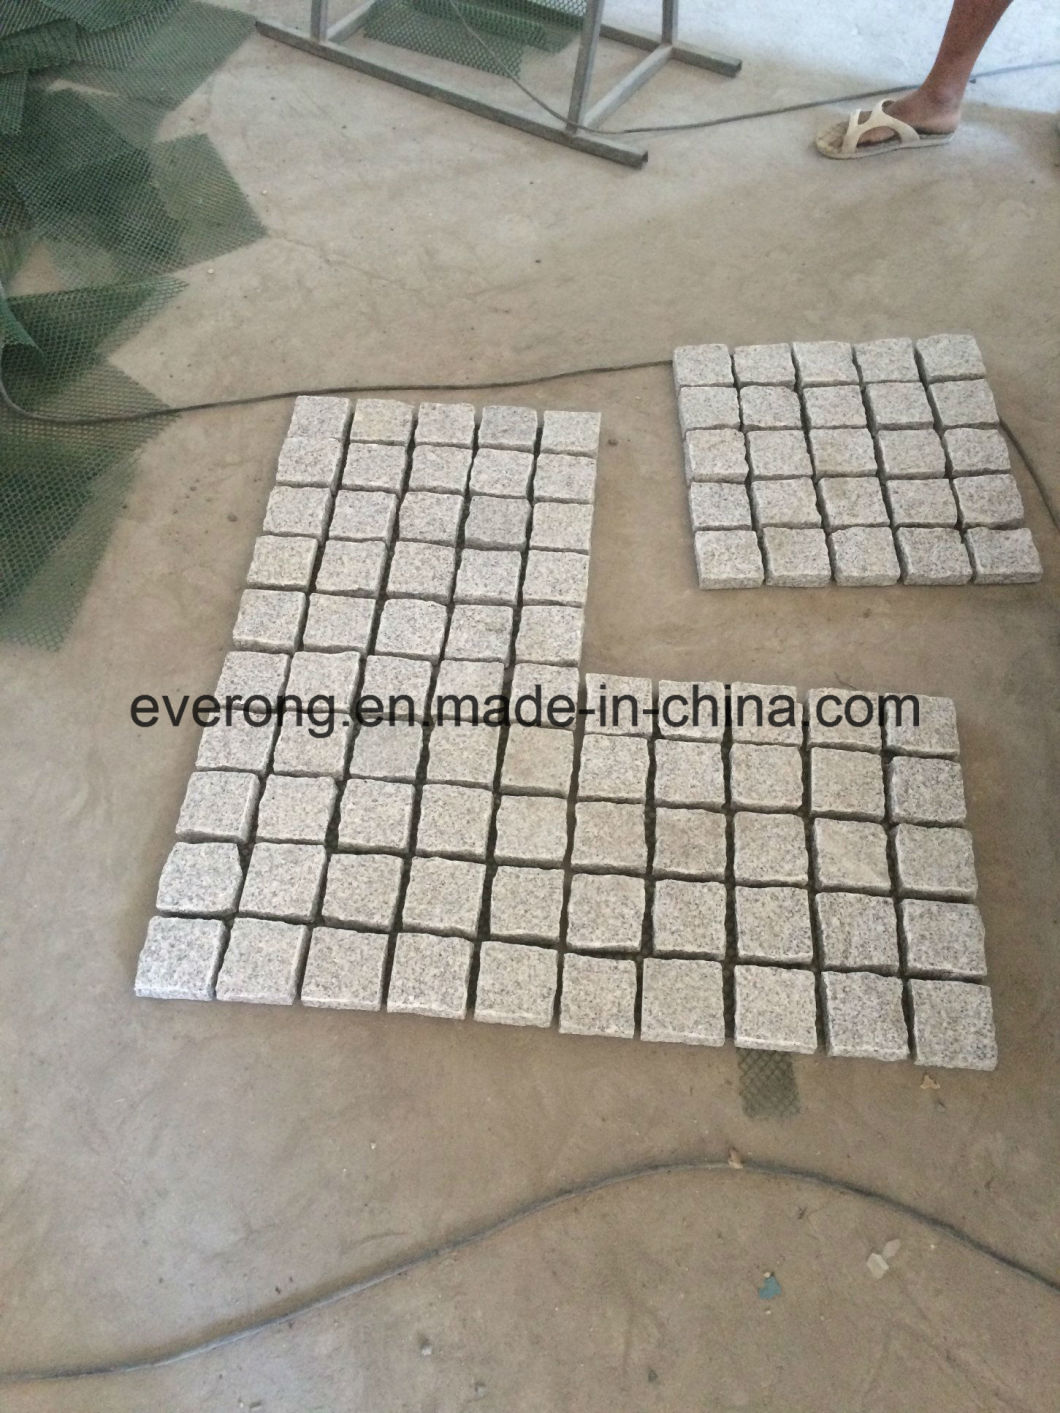 Light Grey Granite Natural Cube Stone/Cobble Stone/Natural Paving Stone with Net